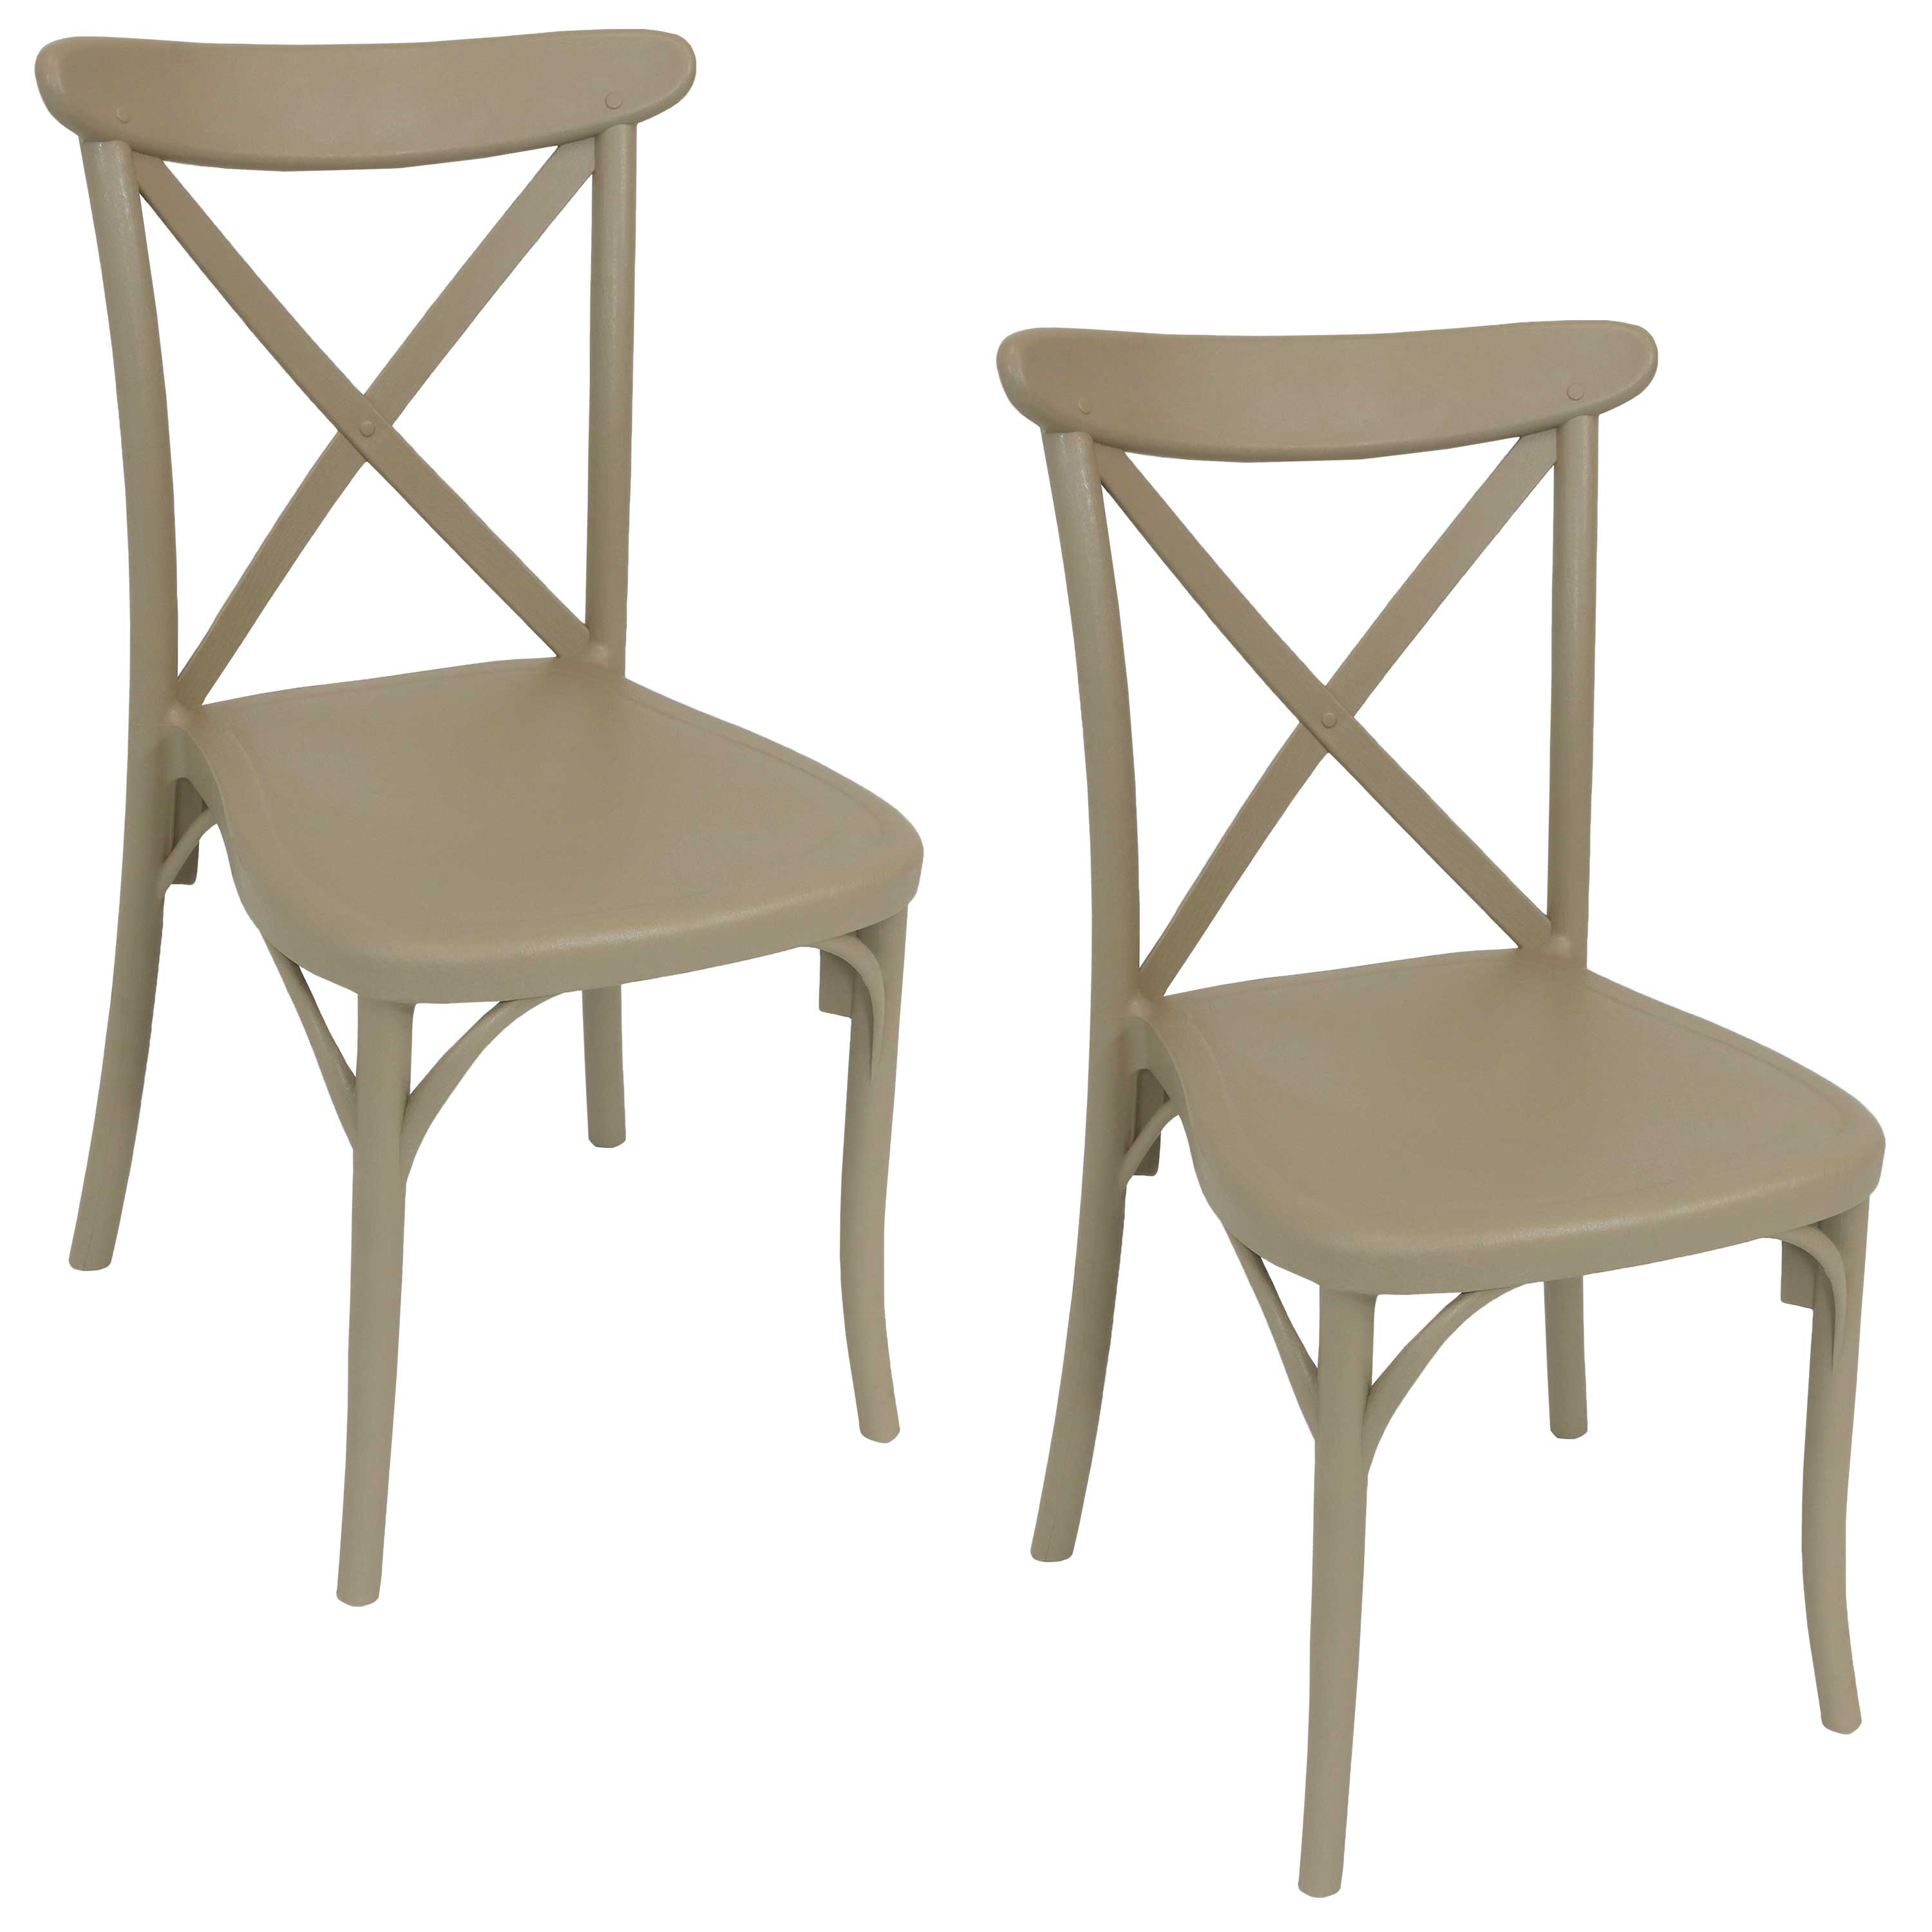 Sunnydaze Bellemead Plastic Patio Dining Chair - Coffee - 2-Pack